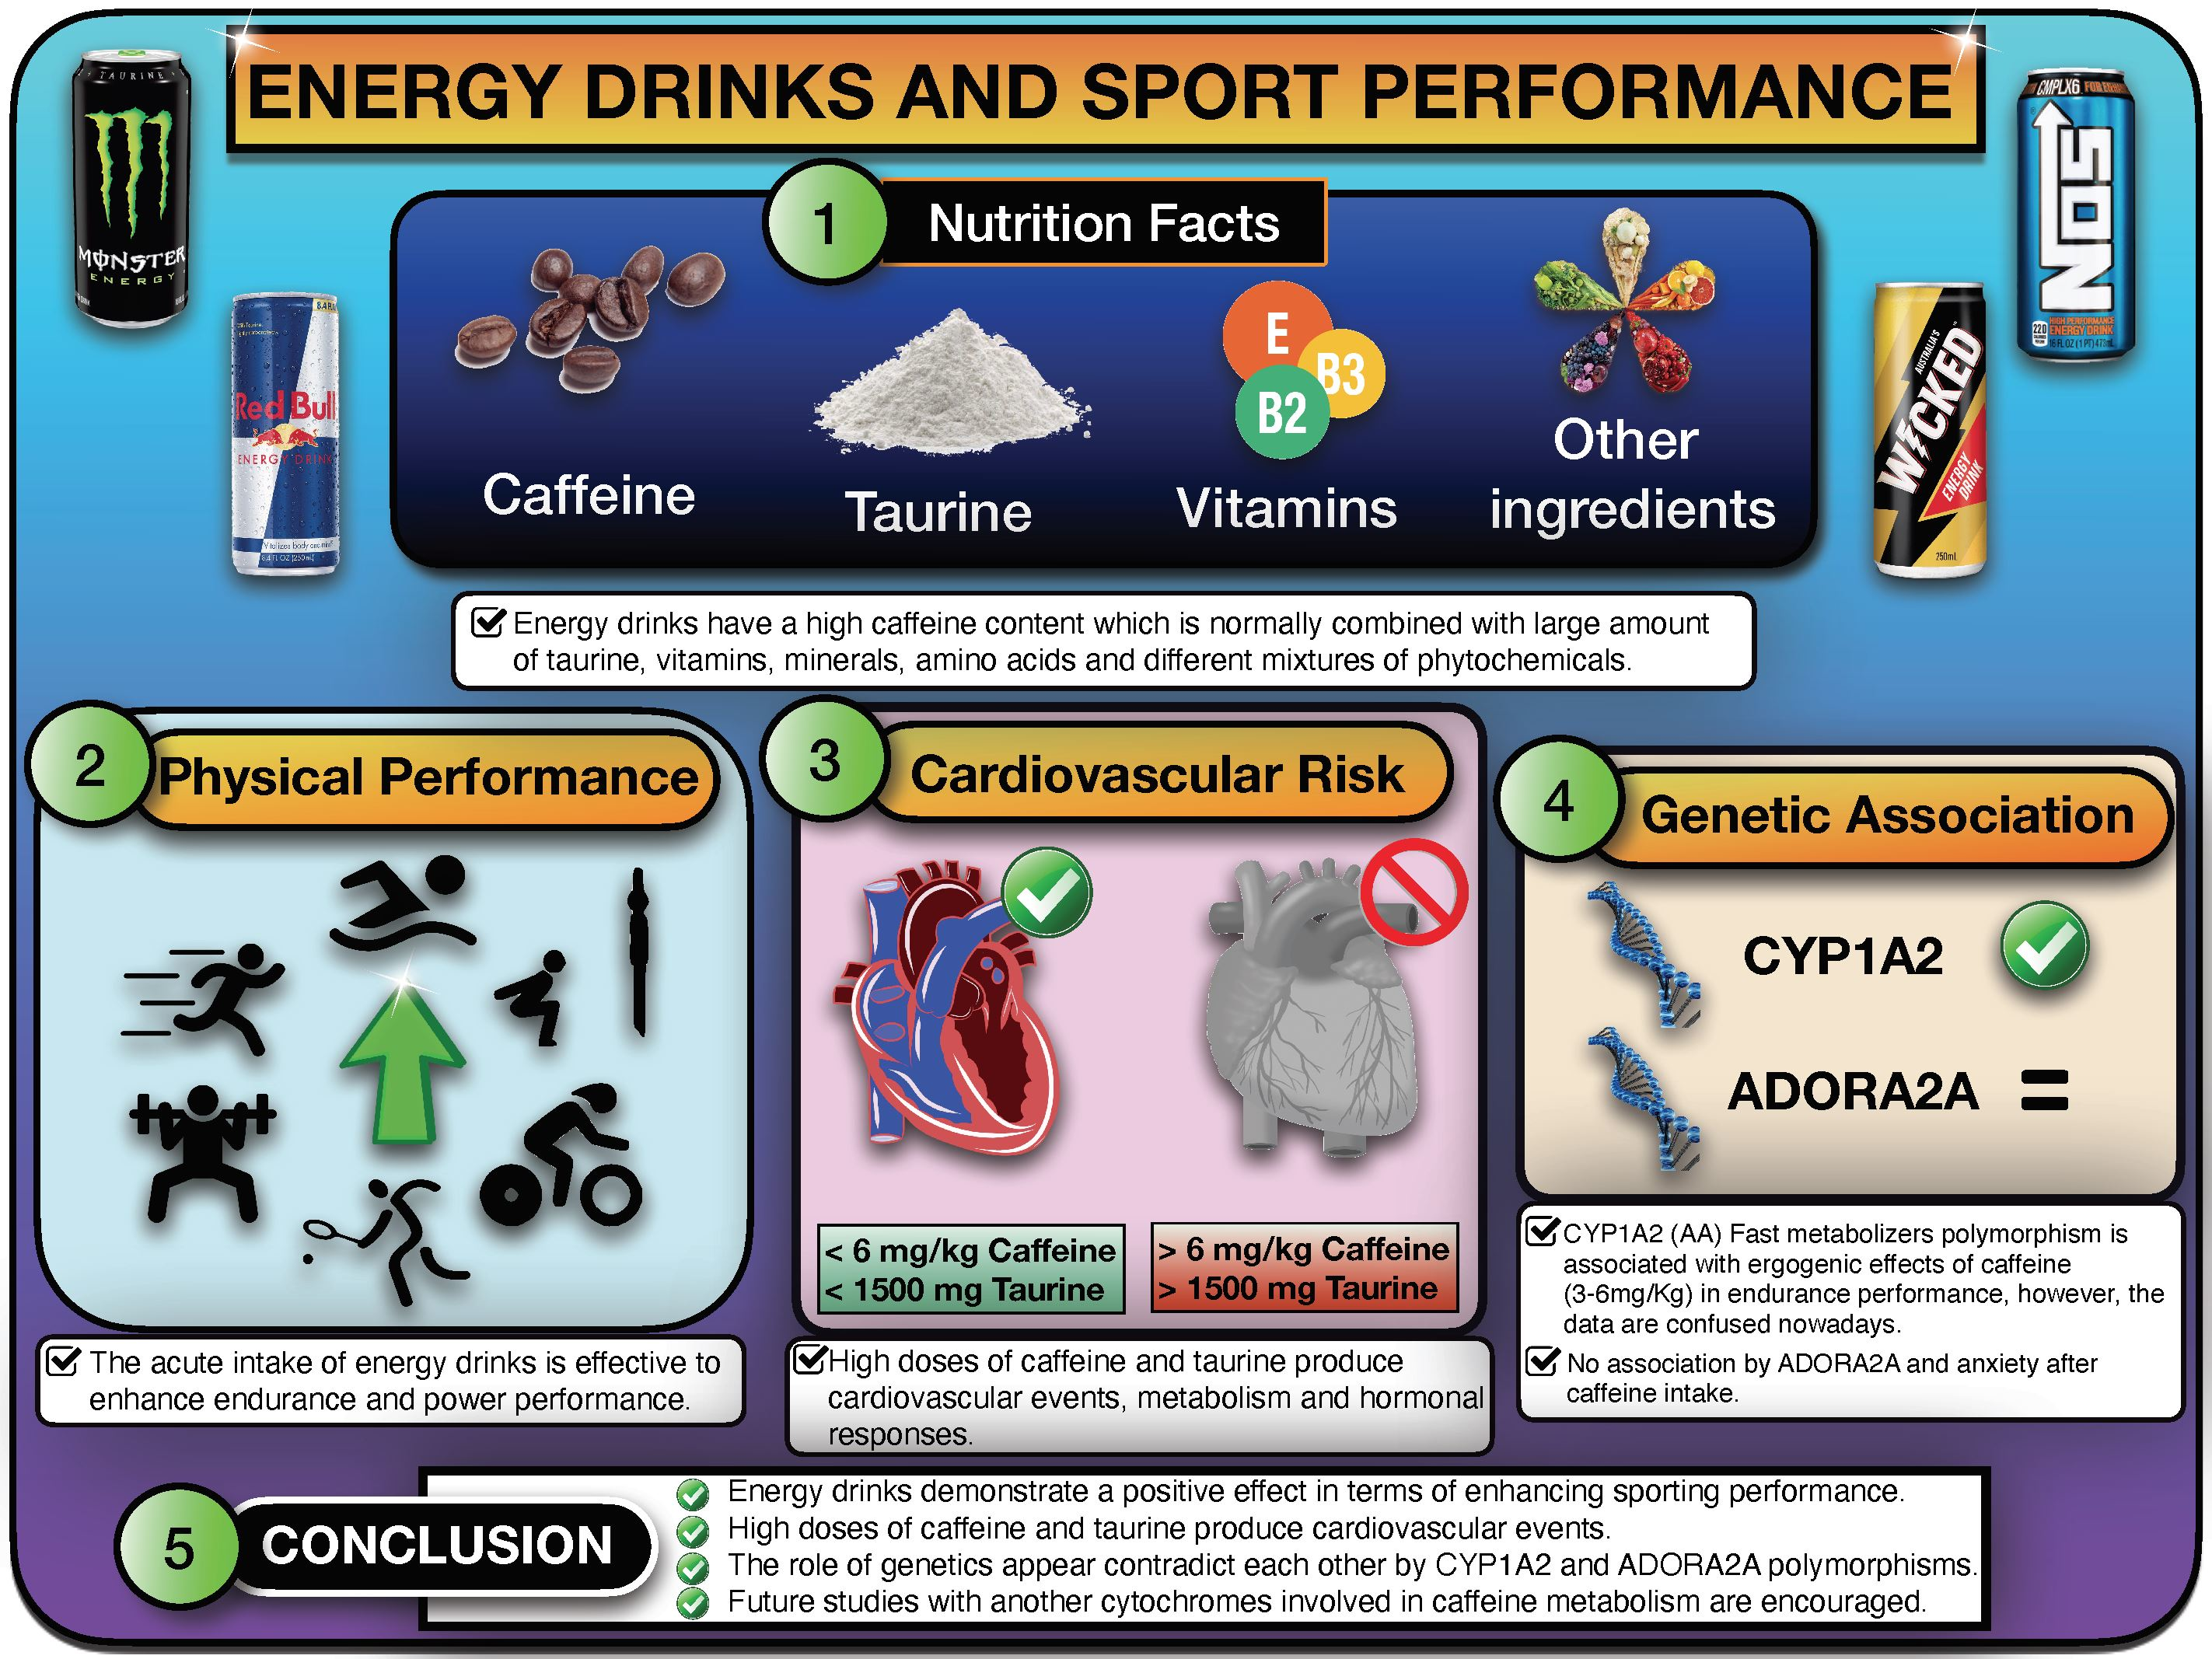 Nutrients Free Full-Text Energy Drinks and Sports Performance, Cardiovascular Risk, and Genetic Associations; Future Prospects picture